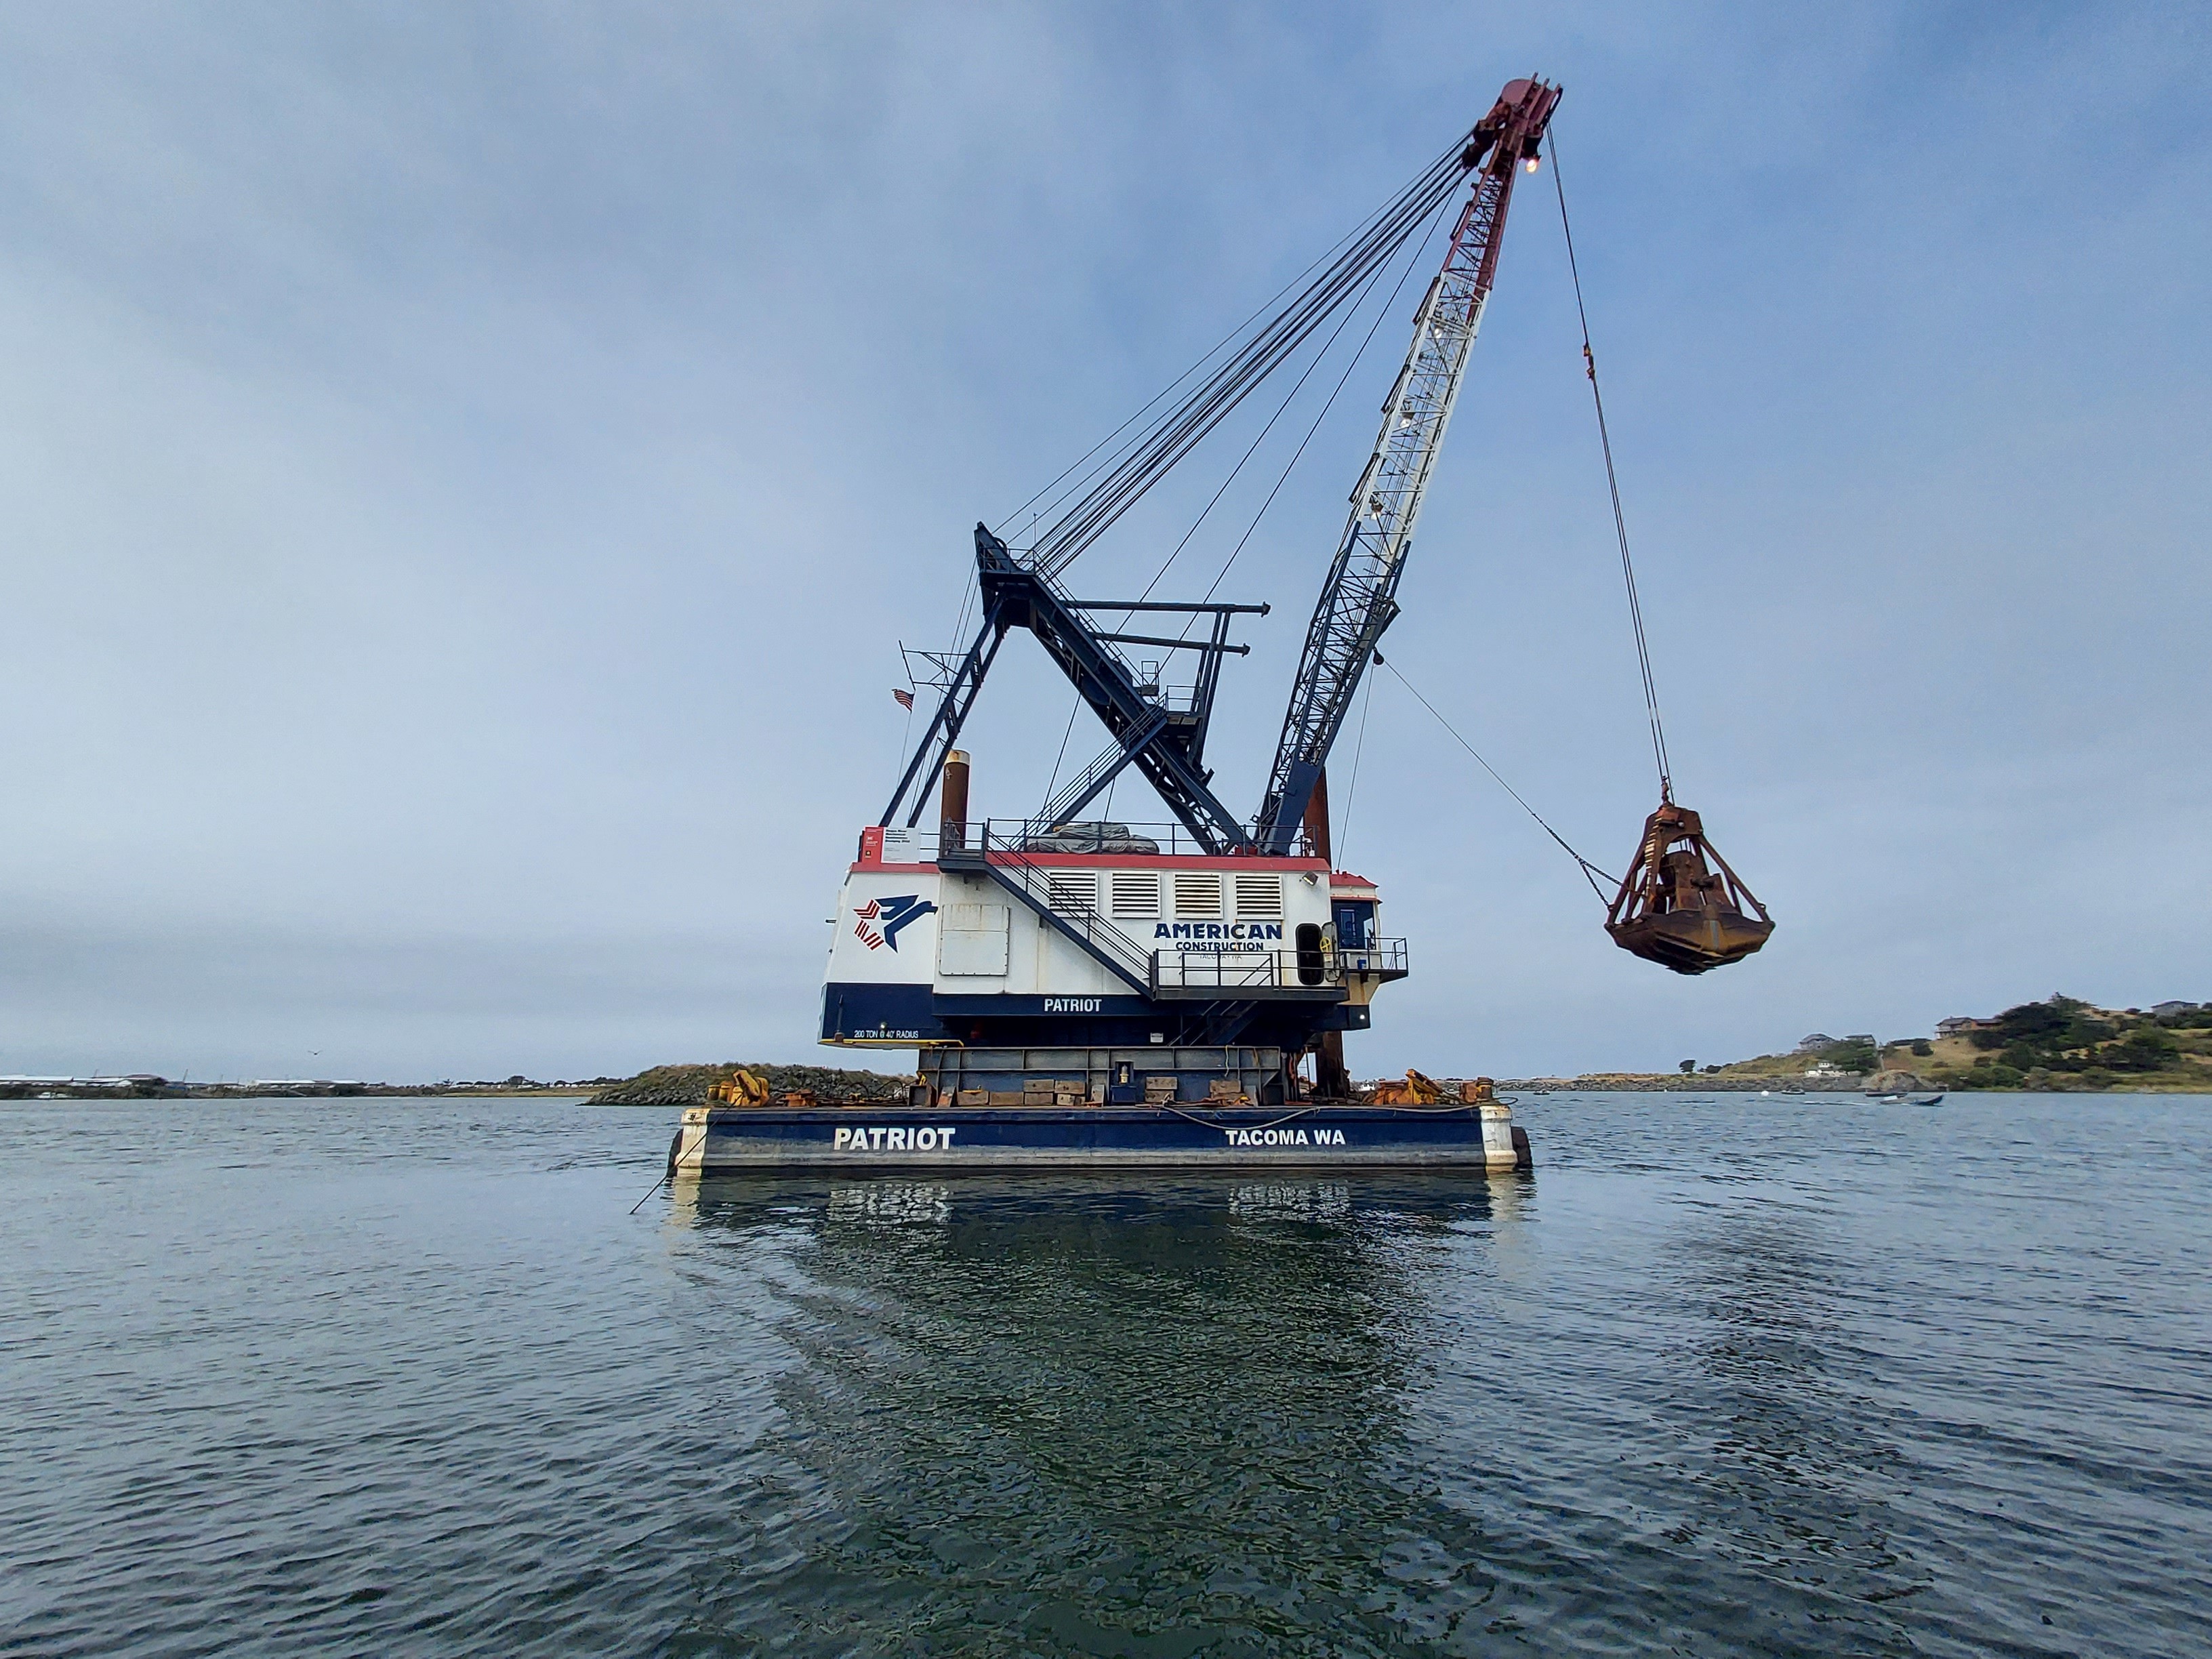 9,200 buckets later, Corps dredging halfway complete at Gold Beach >Portland District >Portland District News Releases” style=’clear:both; float:right; padding:10px 0px 10px 10px; border:0px; max-width: 320px;’> What are some tax benefits of an IRA? An IRA is a private financial savings plan that gives you tax advantages for setting apart cash for retirement. Retirement plans: A retirement plan distribution paid to you is subject to necessary withholding of 20%, even if you happen to intend to roll it over later. Which forms of distributions can I roll over? Taking the time to match costs for similar objects will aid you make the fitting alternative. Your Specialist will verify this with you before walking you thru the required paperwork. With its consumer-pushed focus, prospects can anticipate skilled, attentive customer support and personalized services from Goldco, while the company’s prime-of-the-line storage facility assures that your valuable metals are safe, yet accessible when crucial. Generally talking, both kinds of charges are likely to range from $25-seventy five USD per yr relying on how a lot cash is being saved in your account and what kind of transactions you’re making every month.</p>
<p> Storage fees are assessed annually within the month the depository first acquired the metals. Clients can pay a $90 setup charge, $75 or $100 a 12 months for custodian fees (relying on whether they select Stata Trust or the Delaware Depository as their storage choice), as well as an annual upkeep fee, though the website is unclear about the precise quantity. This penalty is called an early withdrawal penalty and it’s charged by the IRS. Because the IRS prohibits buyers from taking private possession of the valuable metals held in their IRAs, these property must be stored in approved depositories. The new law also prohibits recharacterizing quantities rolled over to a Roth IRA from other retirement plans, comparable to 401(okay) or 403(b) plans. 2. The whole compensation includible in the gross income of both spouses for the yr reduced by the next three amounts. See the dialogue of rollovers and different transfers later in this chapter below Can You progress Retirement Plan Property.</p>
<p> This chapter discusses the original IRA. This publication discusses contributions to conventional and Roth IRAs. This publication discusses contributions to particular person retirement preparations (IRAs). Pictures of lacking youngsters selected by the middle could appear on this publication on pages that would in any other case be blank. Images of missing youngsters. Is my retirement plan required to allow switch of any quantities eligible for a distribution? Can a certified charitable distribution satisfy my required minimal distribution from an IRA? Retirement plan at work: Your deduction may be restricted if you (or your spouse, if you are married) are lined by a retirement plan at work and your earnings exceeds certain levels. This traditional IRA limit is lowered by any contributions to a section 501(c)(18) plan (typically, a pension plan created before June 25, 1959, that’s funded fully by worker contributions). For more data on all these plans, see the SEP, Simple IRA plan and SARSEP FAQs. This price covers the administrative costs of closing the account, liquidating the property, and transferring the funds to the investor or another retirement account. APMEX uses its subsidiary Citadel International Depository Services as a storage facility, which is protected by Brinks Security.</p>

</div><!-- .entry -->


	<section id=